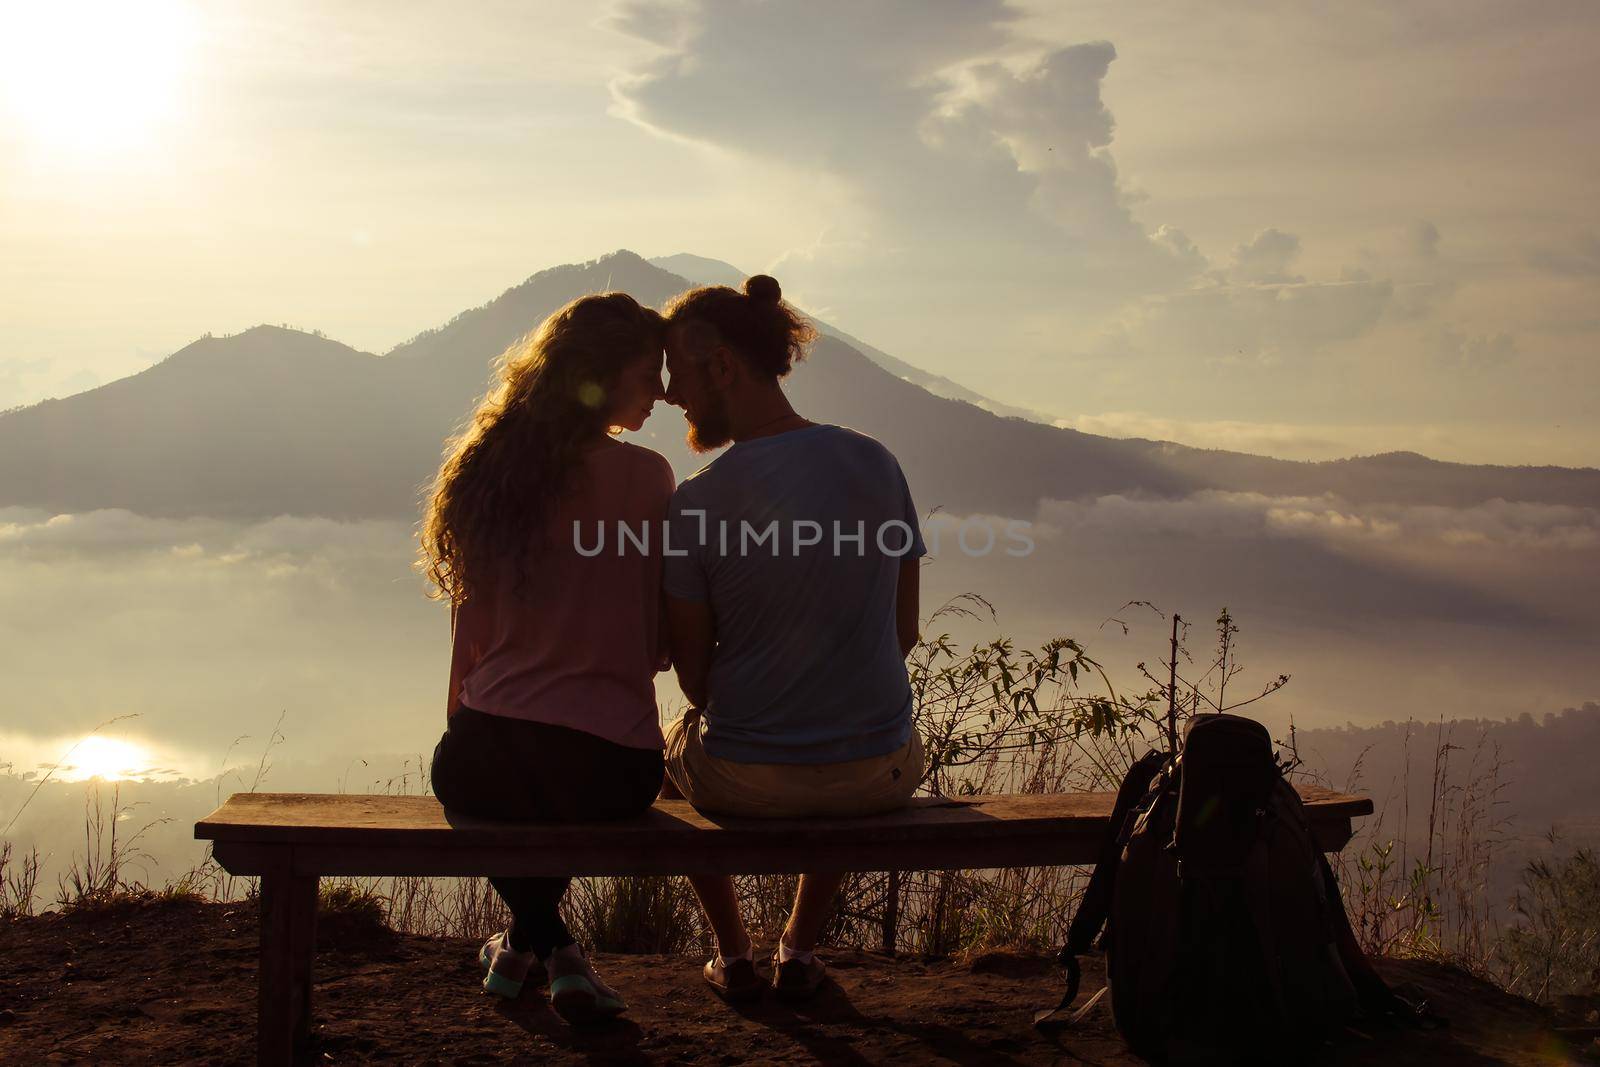 Rear view of a loving couple enjoying the sunset at the sun on top of the mountain. Stock image.